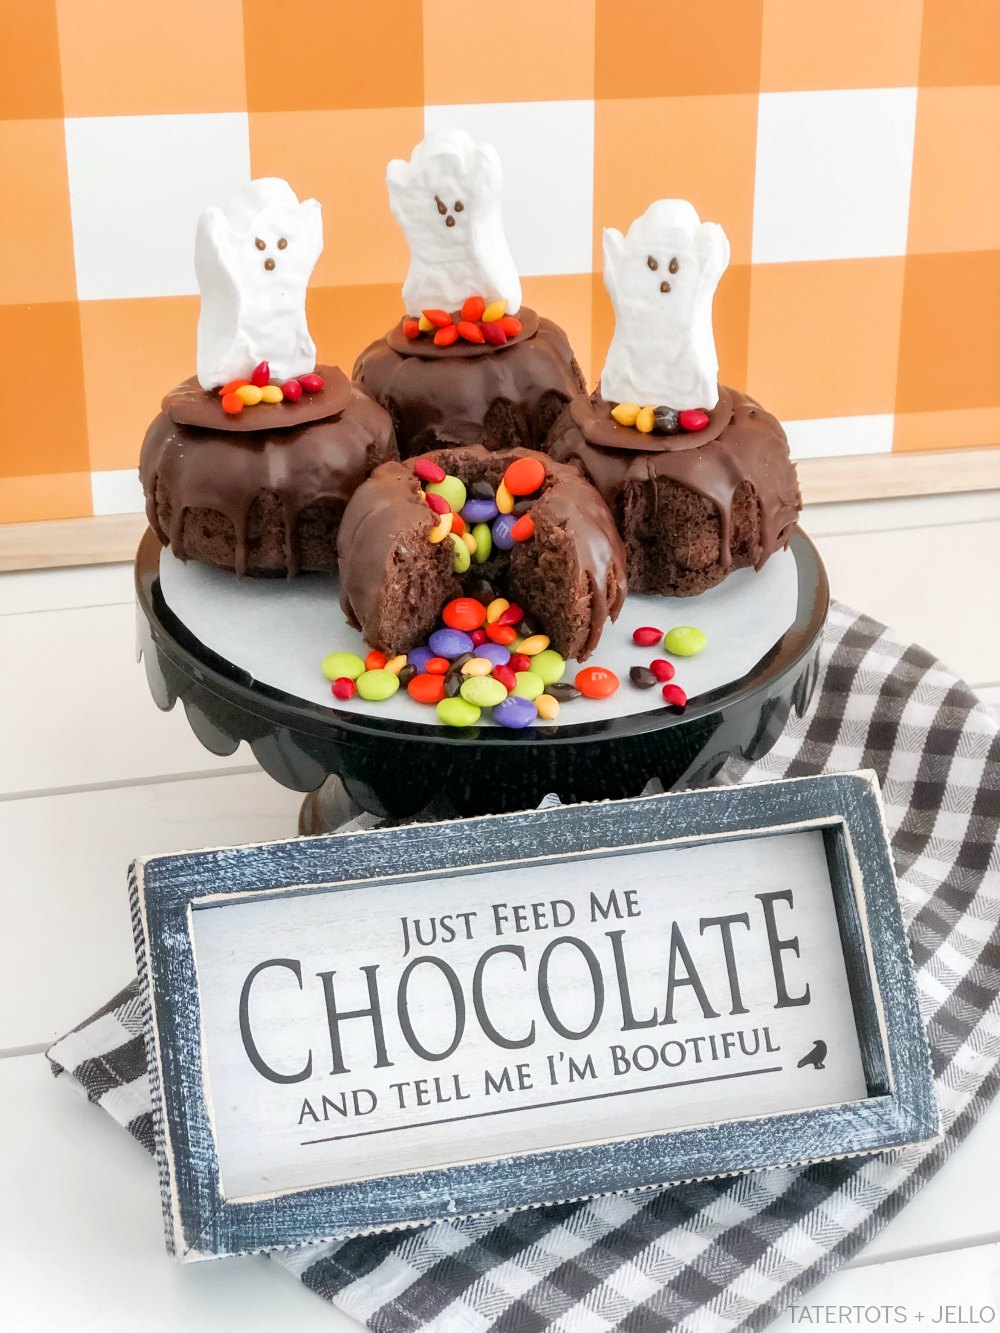 Halloween Cauldron Mini Cakes with Candy Inside! These tiny cakes are perfect for Halloween parties this year and kids will love biting inside to find a candy surprise.